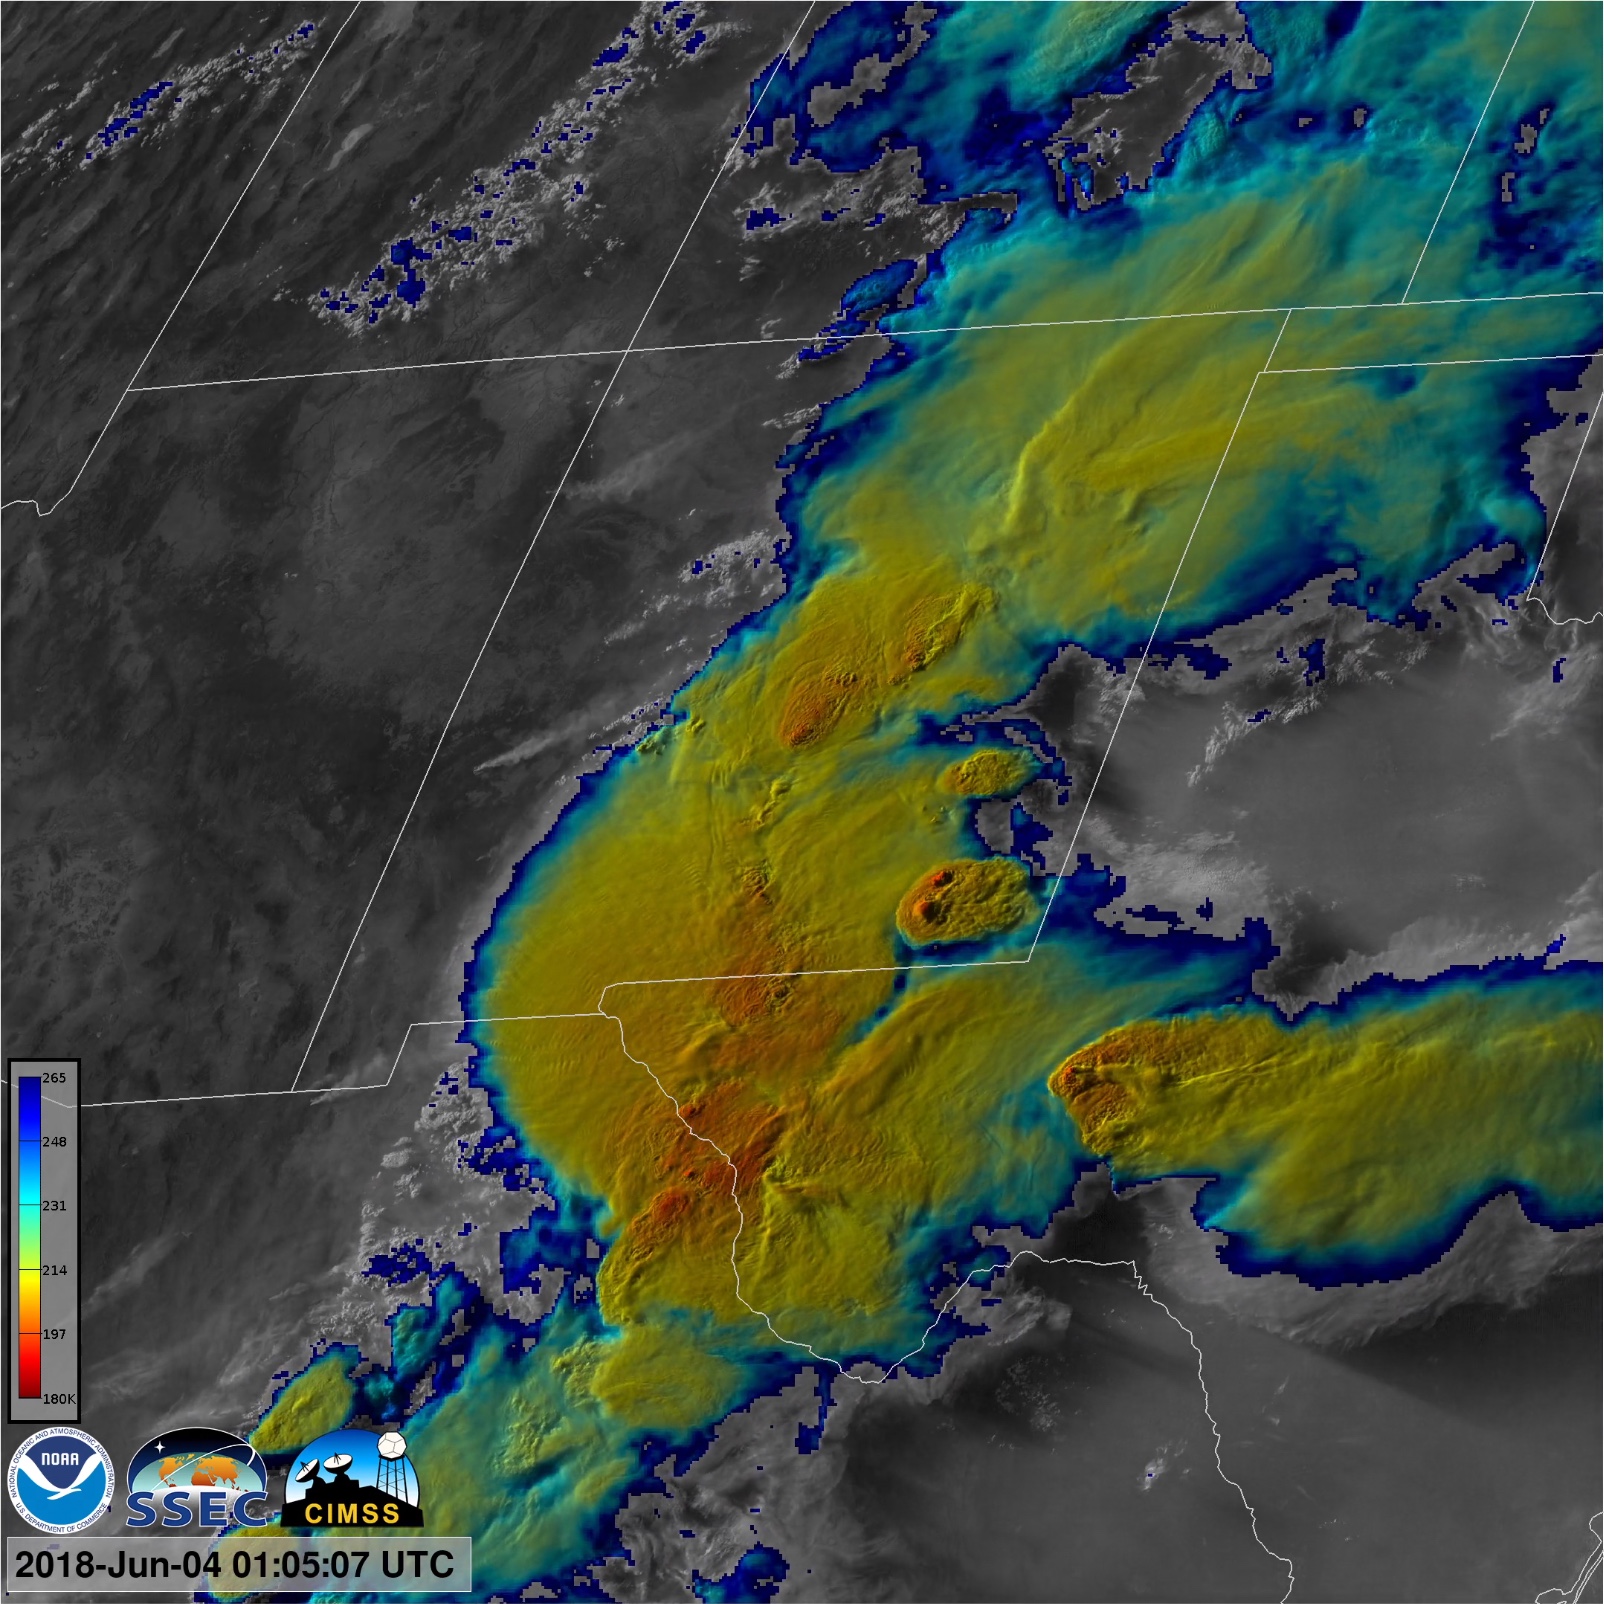 GOES-16 Visible/Infrared Sandwich product [click to play MP4 animation]